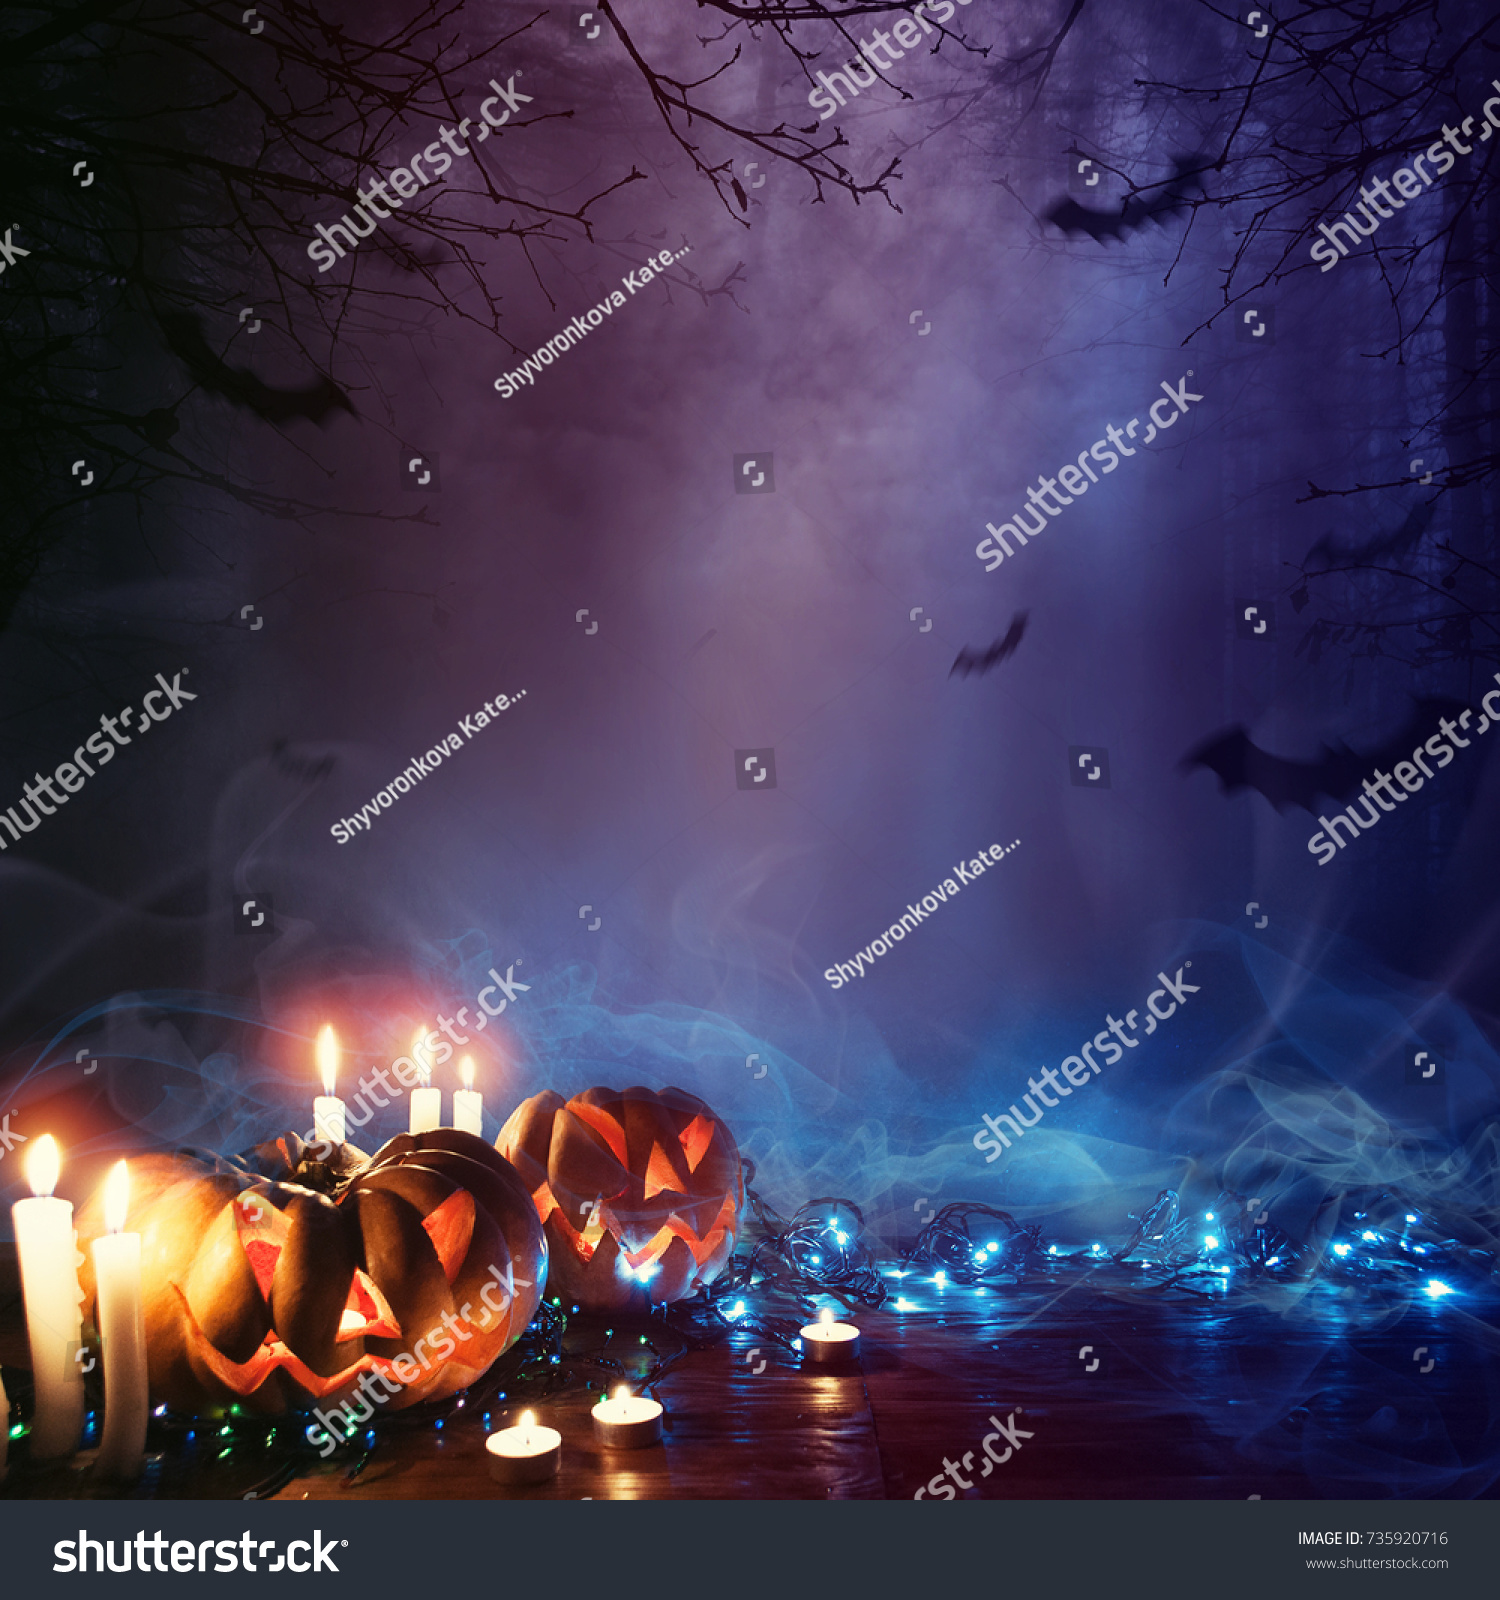 Halloween Pumpkin In A Mystic Forest At Night #735920716